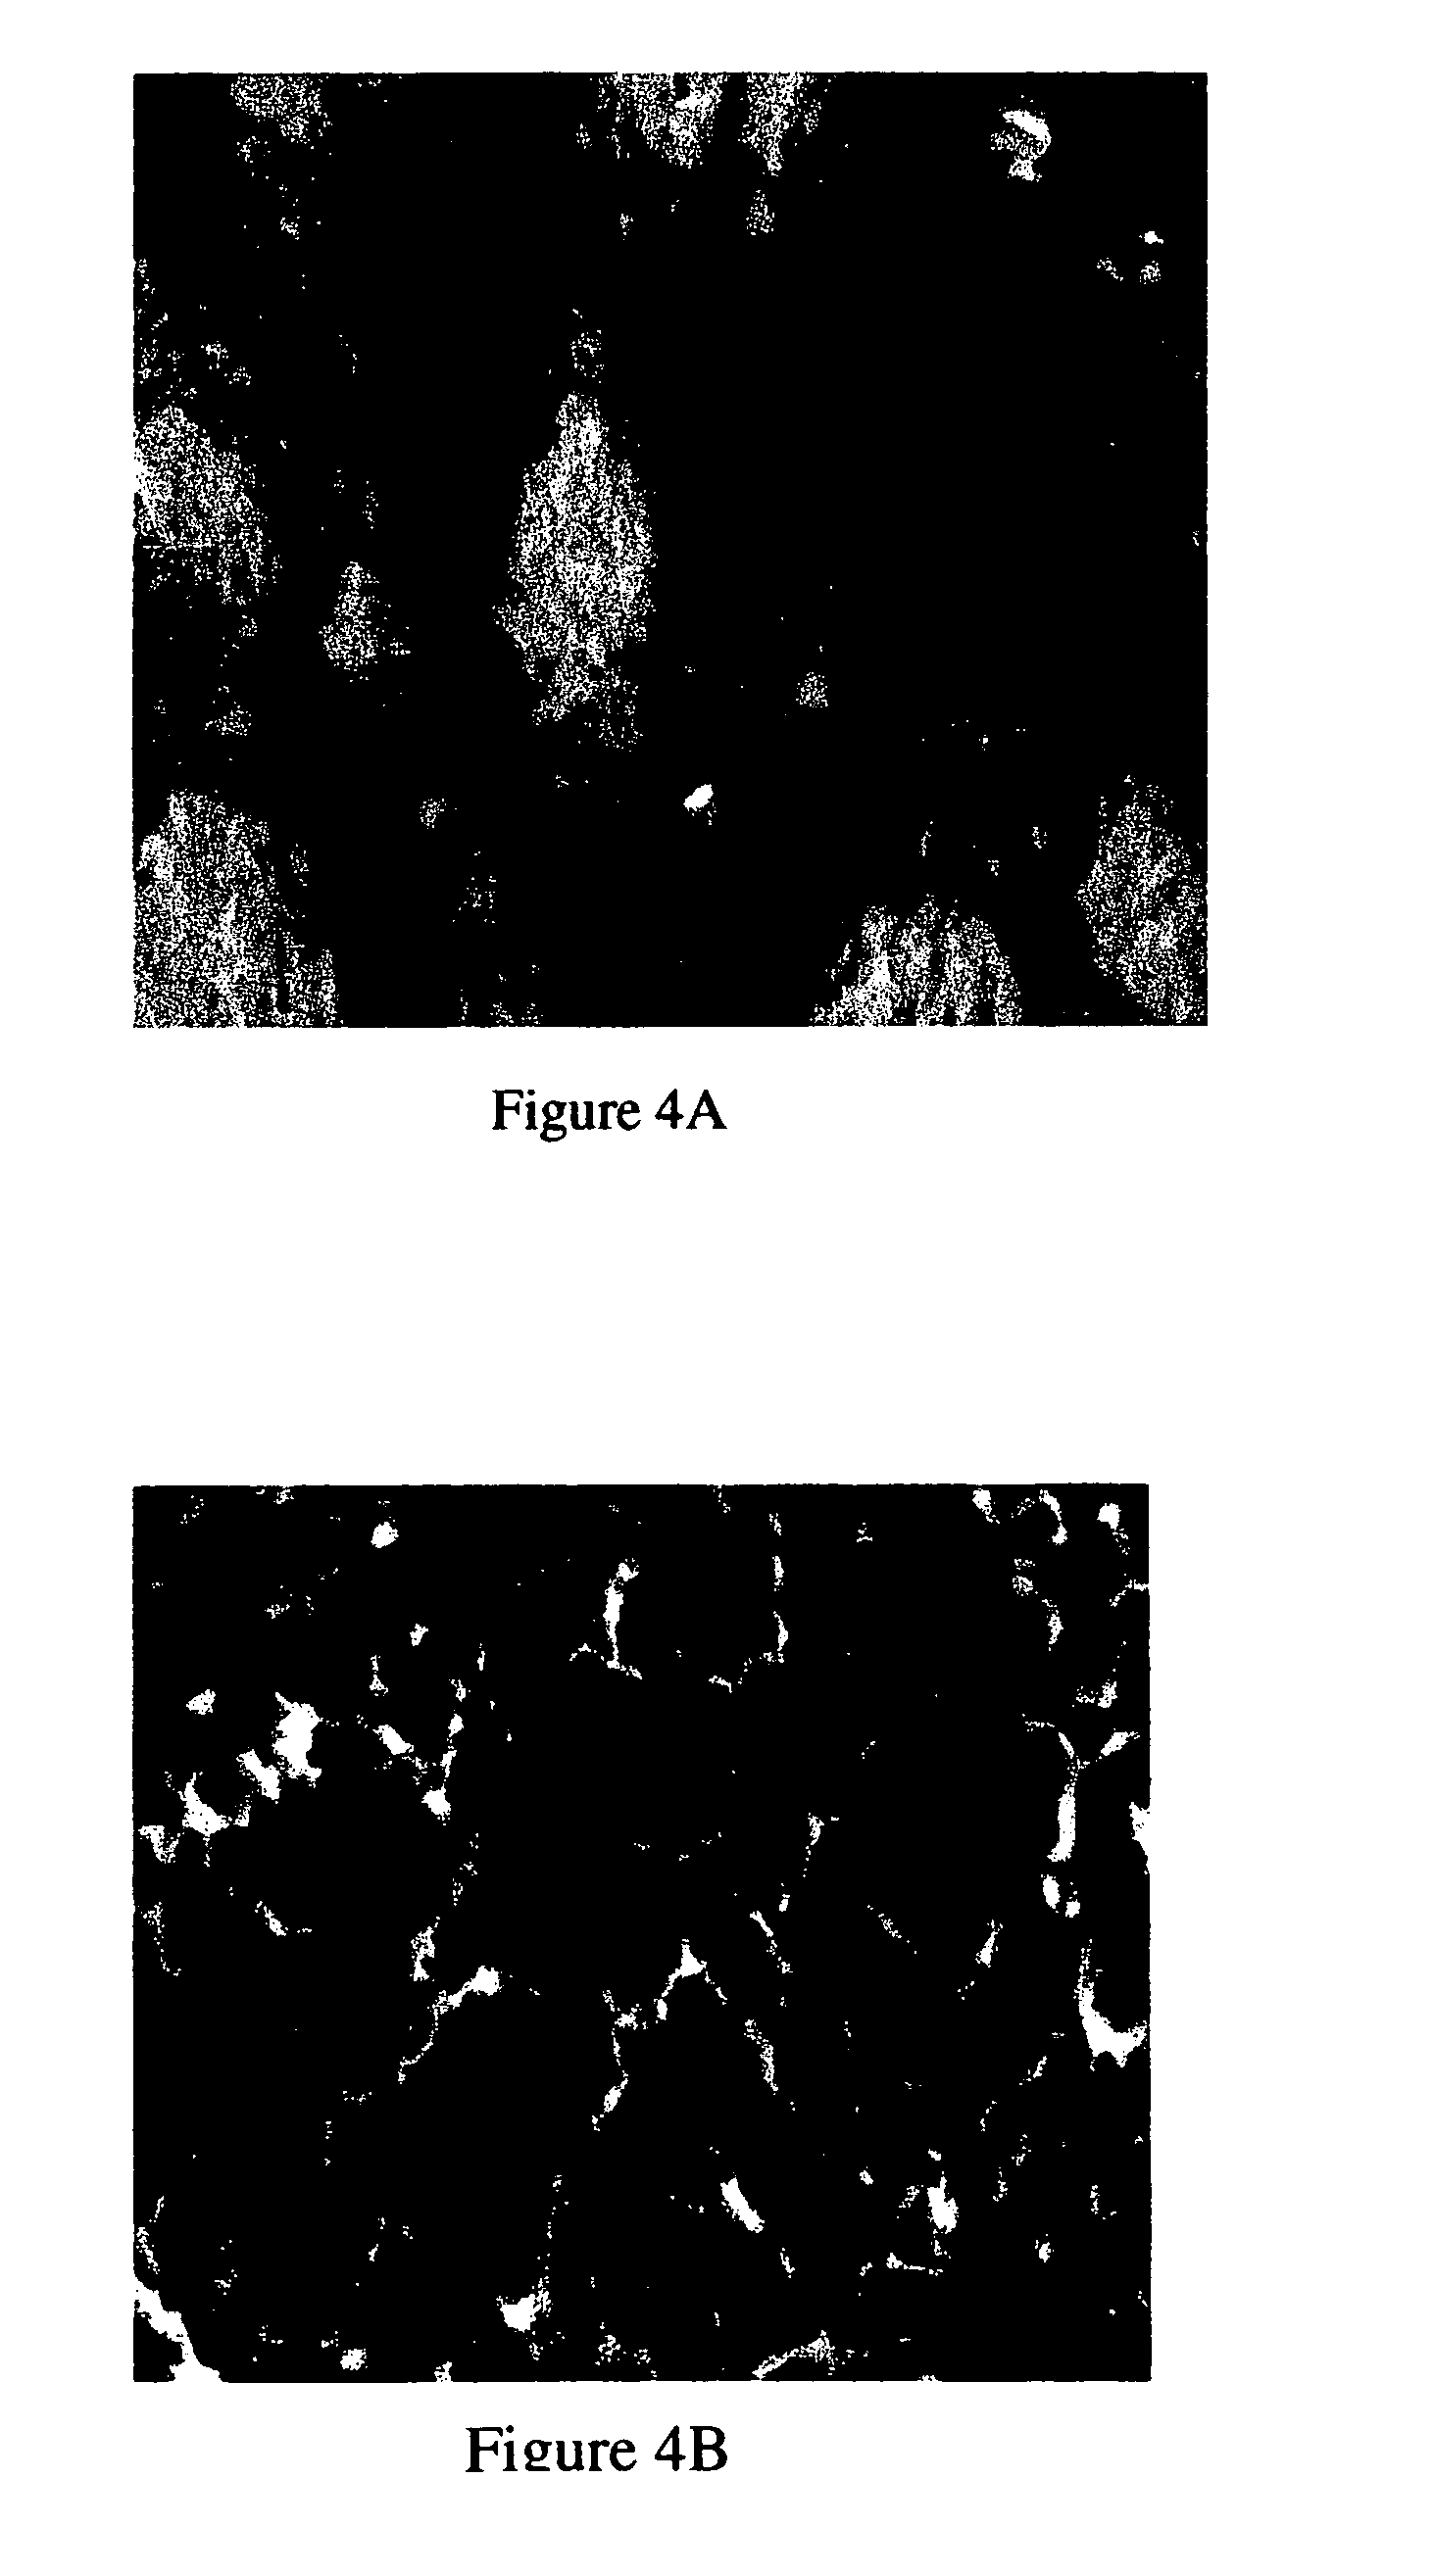 Method for using potassium channel agonists for delivering a medicant to an abnormal brain region and/or a malignant tumor